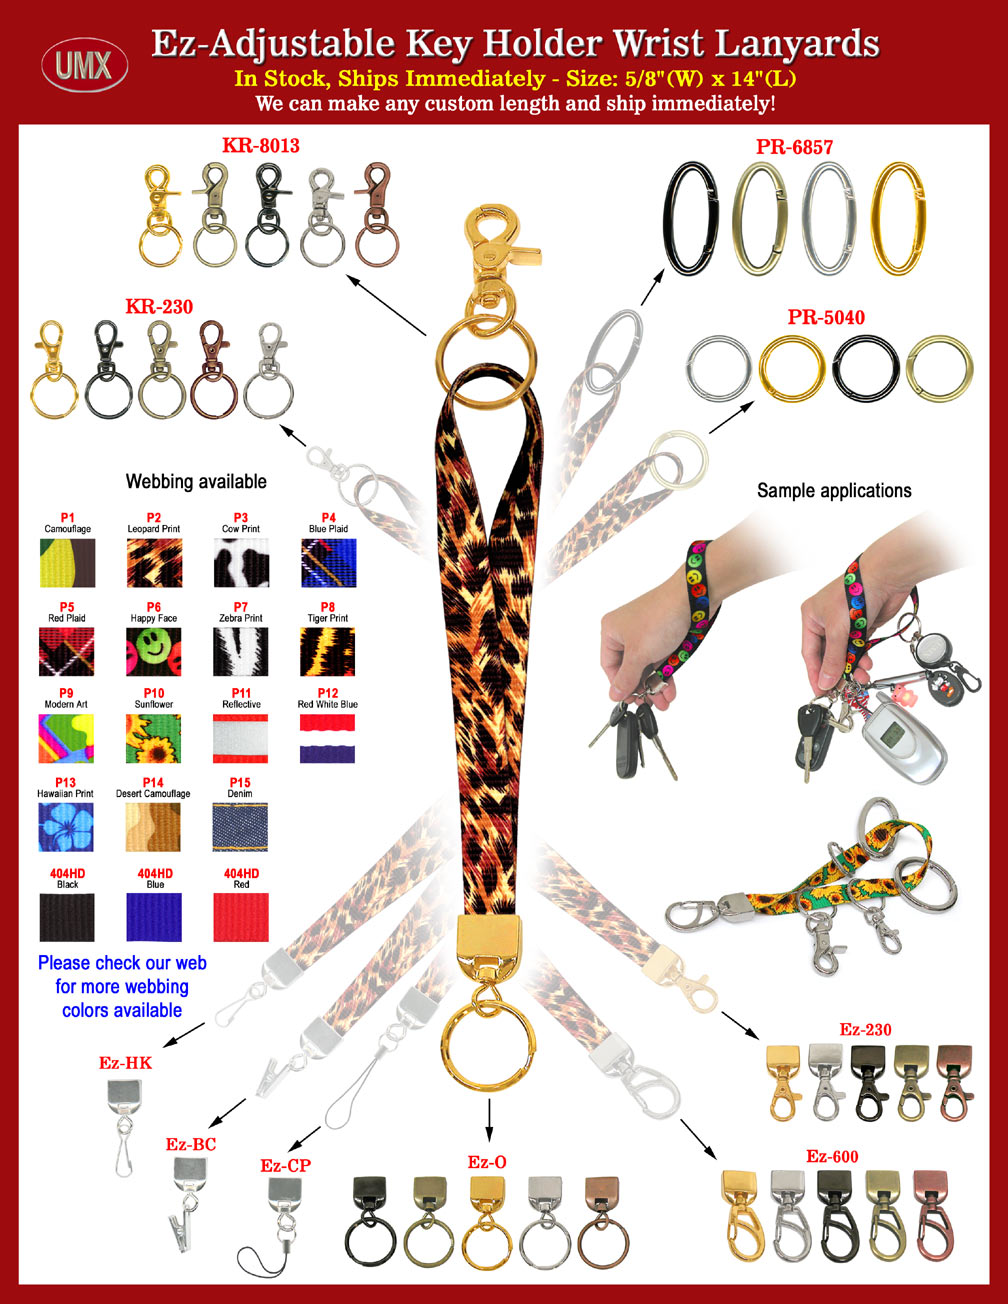 How To Design and Make Your Own Key Holder Wrist Lanyards? Step By Step Instructions With Photos